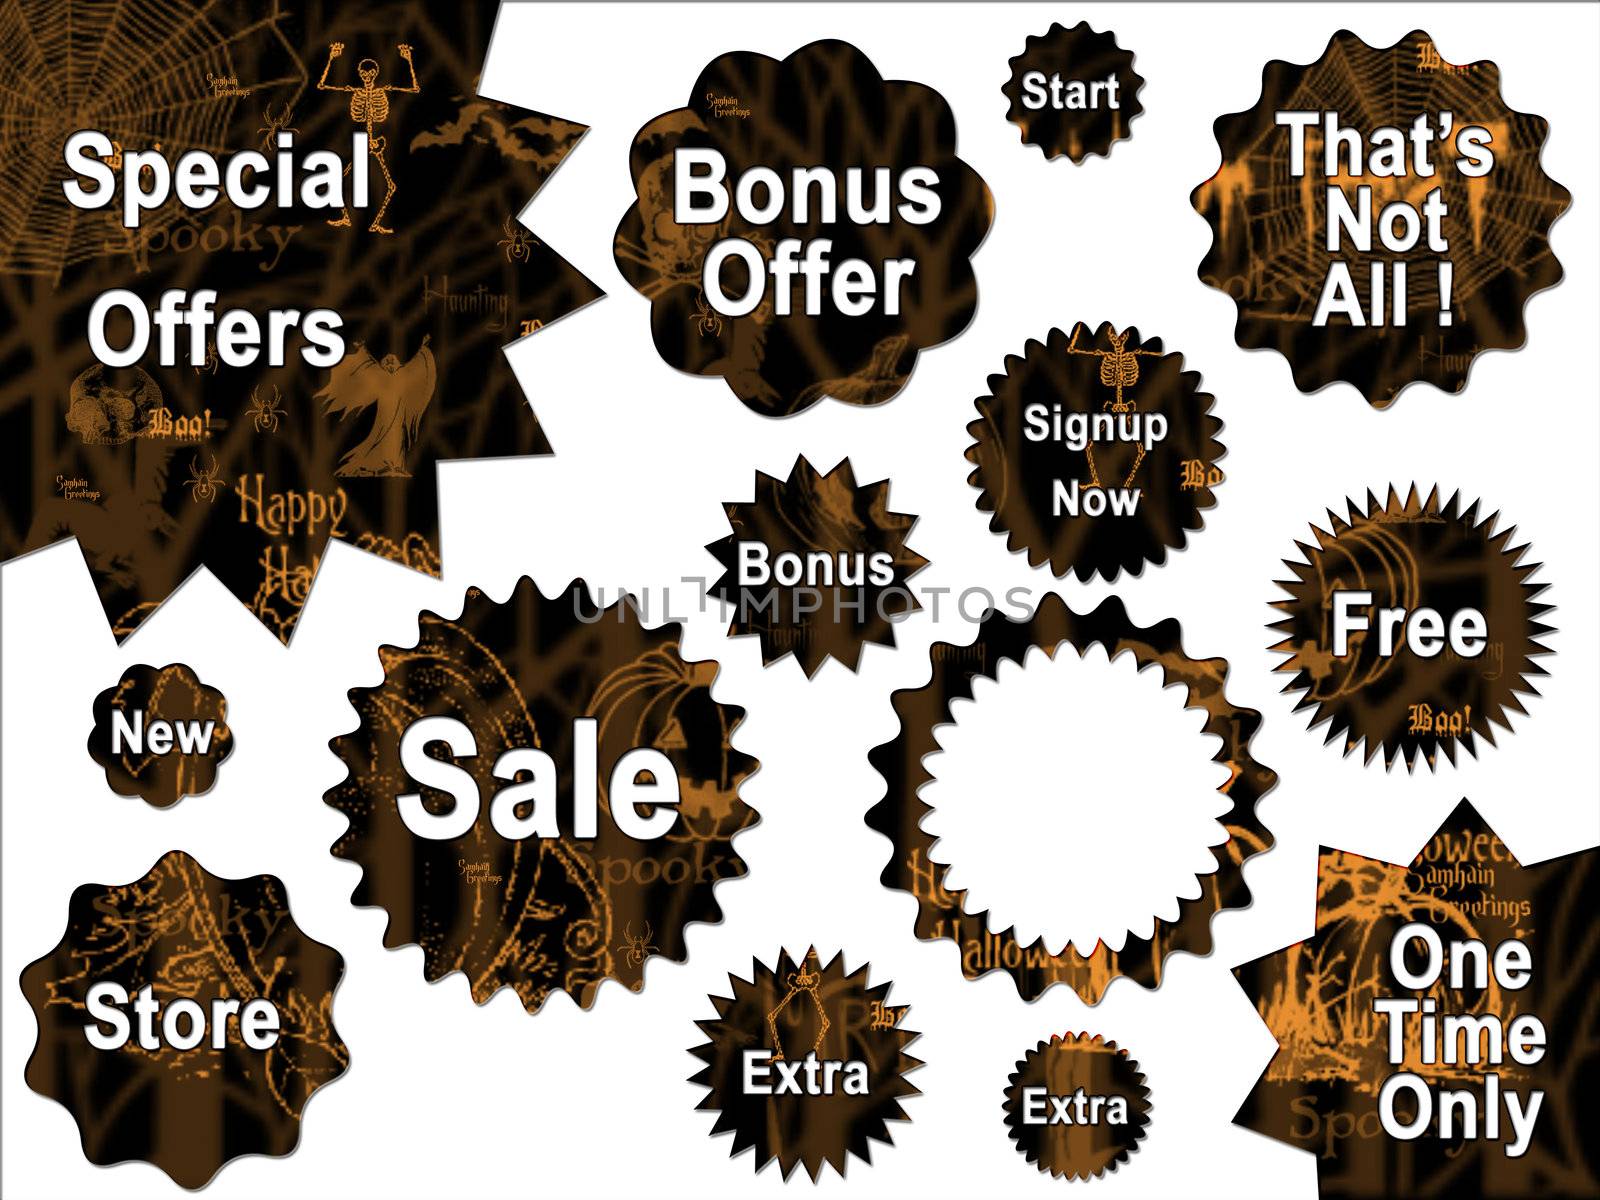 Black and orange Halloween For Sale and Offer Stars and Shapes Stickers Website Buttons Interface